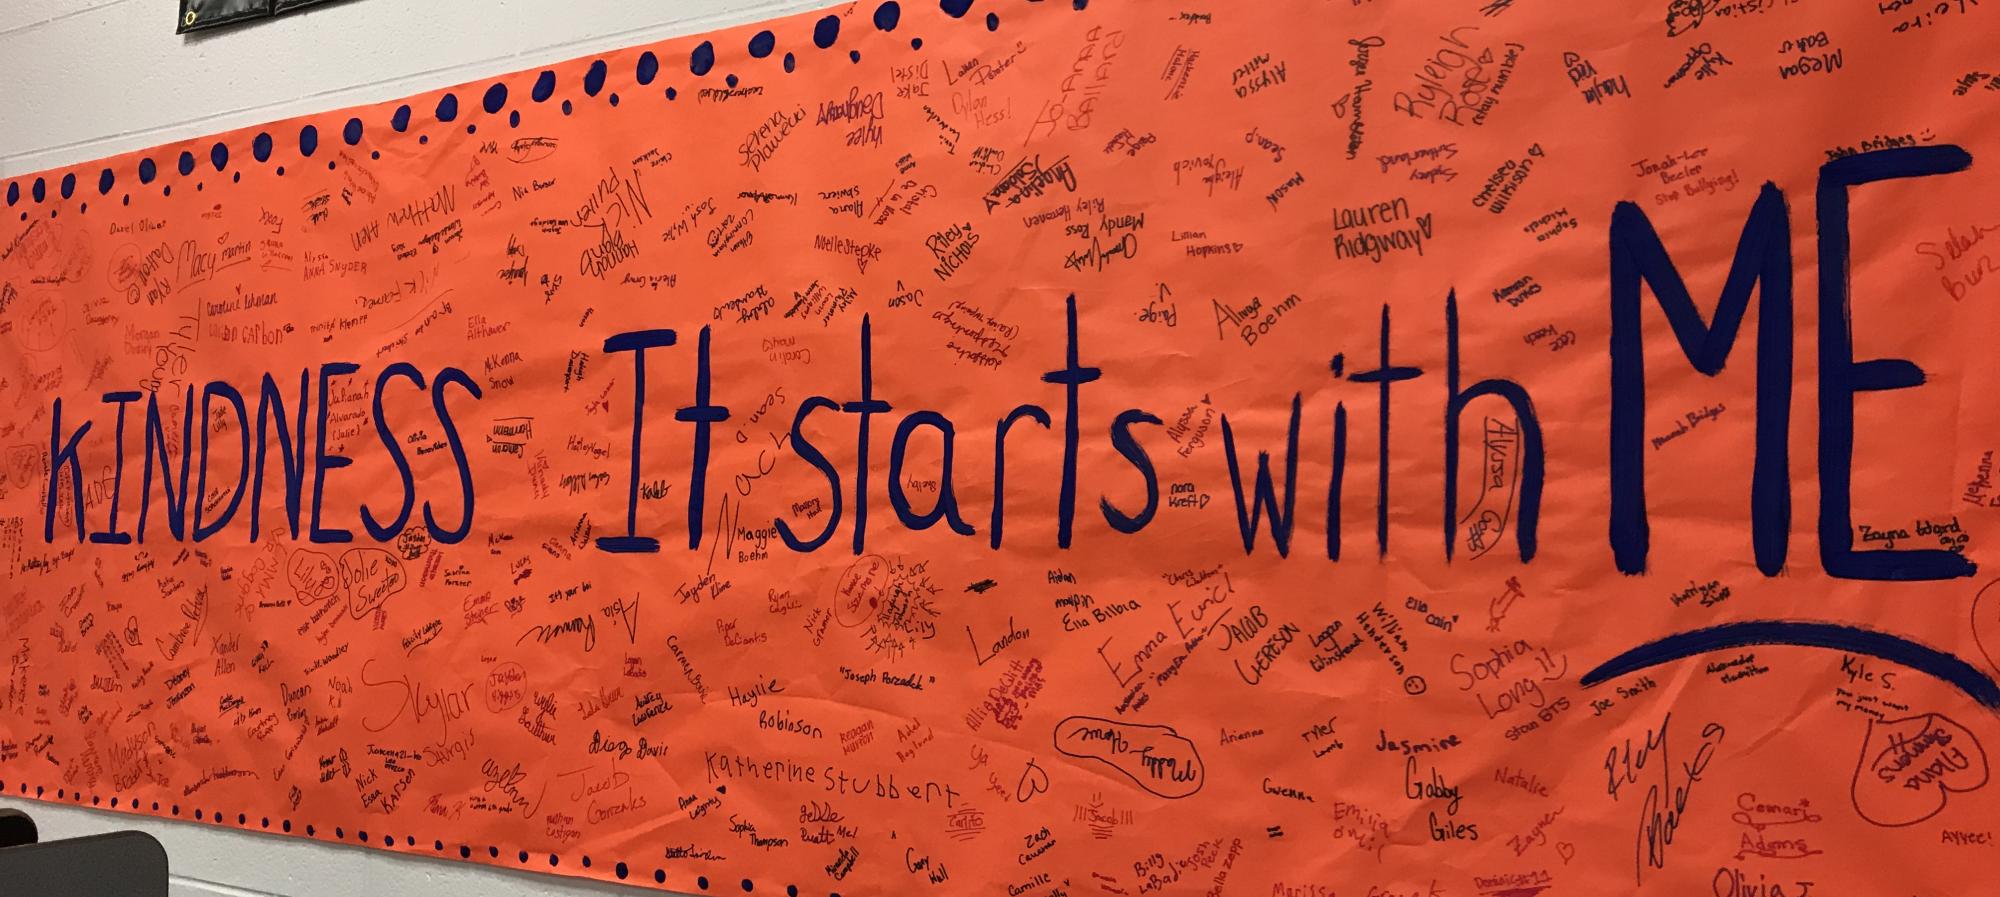 Banner - Kindness "It starts with me"